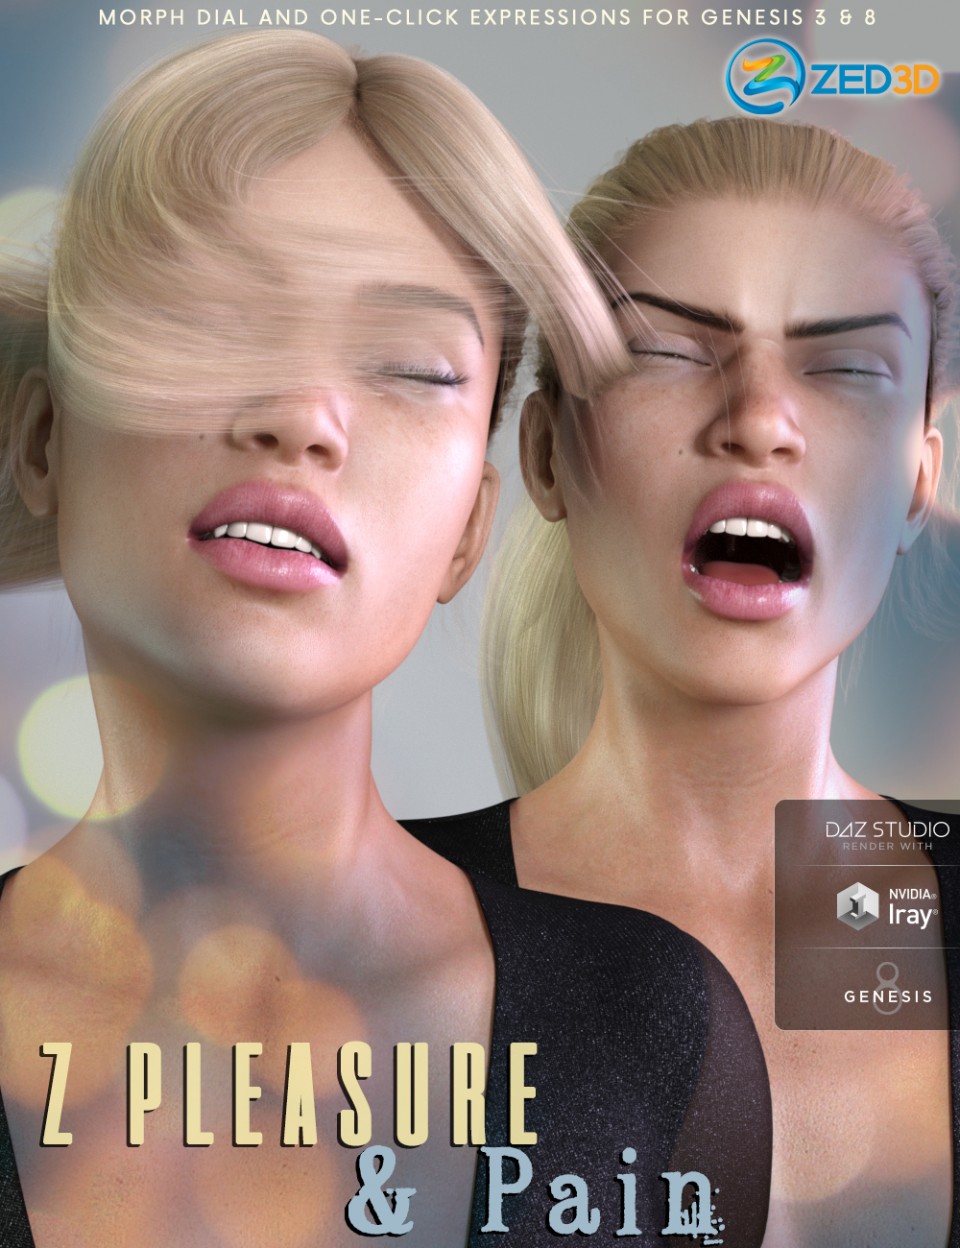 Z Pleasure and Pain – Dialable and One-Click Expressions for Genesis 3 and 8_DAZ3DDL